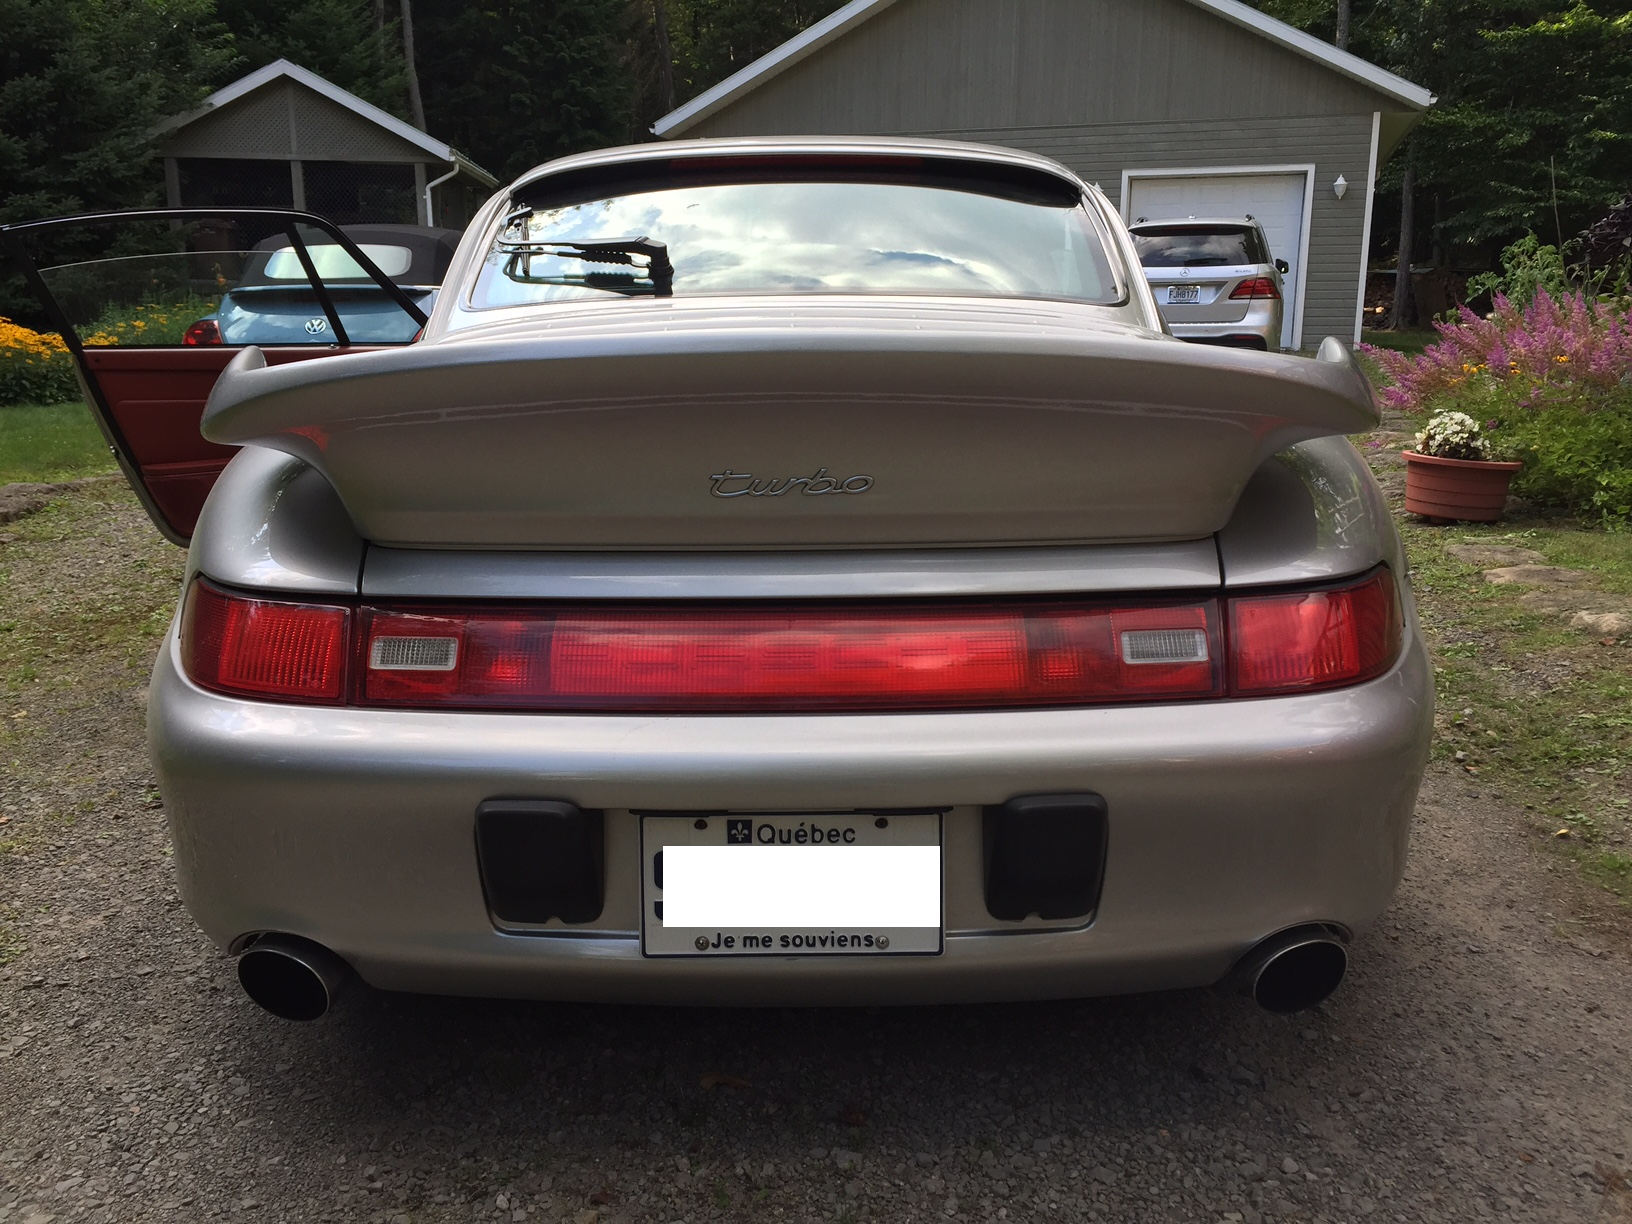 1997 Porsche 911 - 993 Twin Turbo - Used - VIN WP0AC2994VS375488 - 51,600 Miles - 6 cyl - AWD - Manual - Coupe - Silver - Montreal, QC J0R1B0, Canada